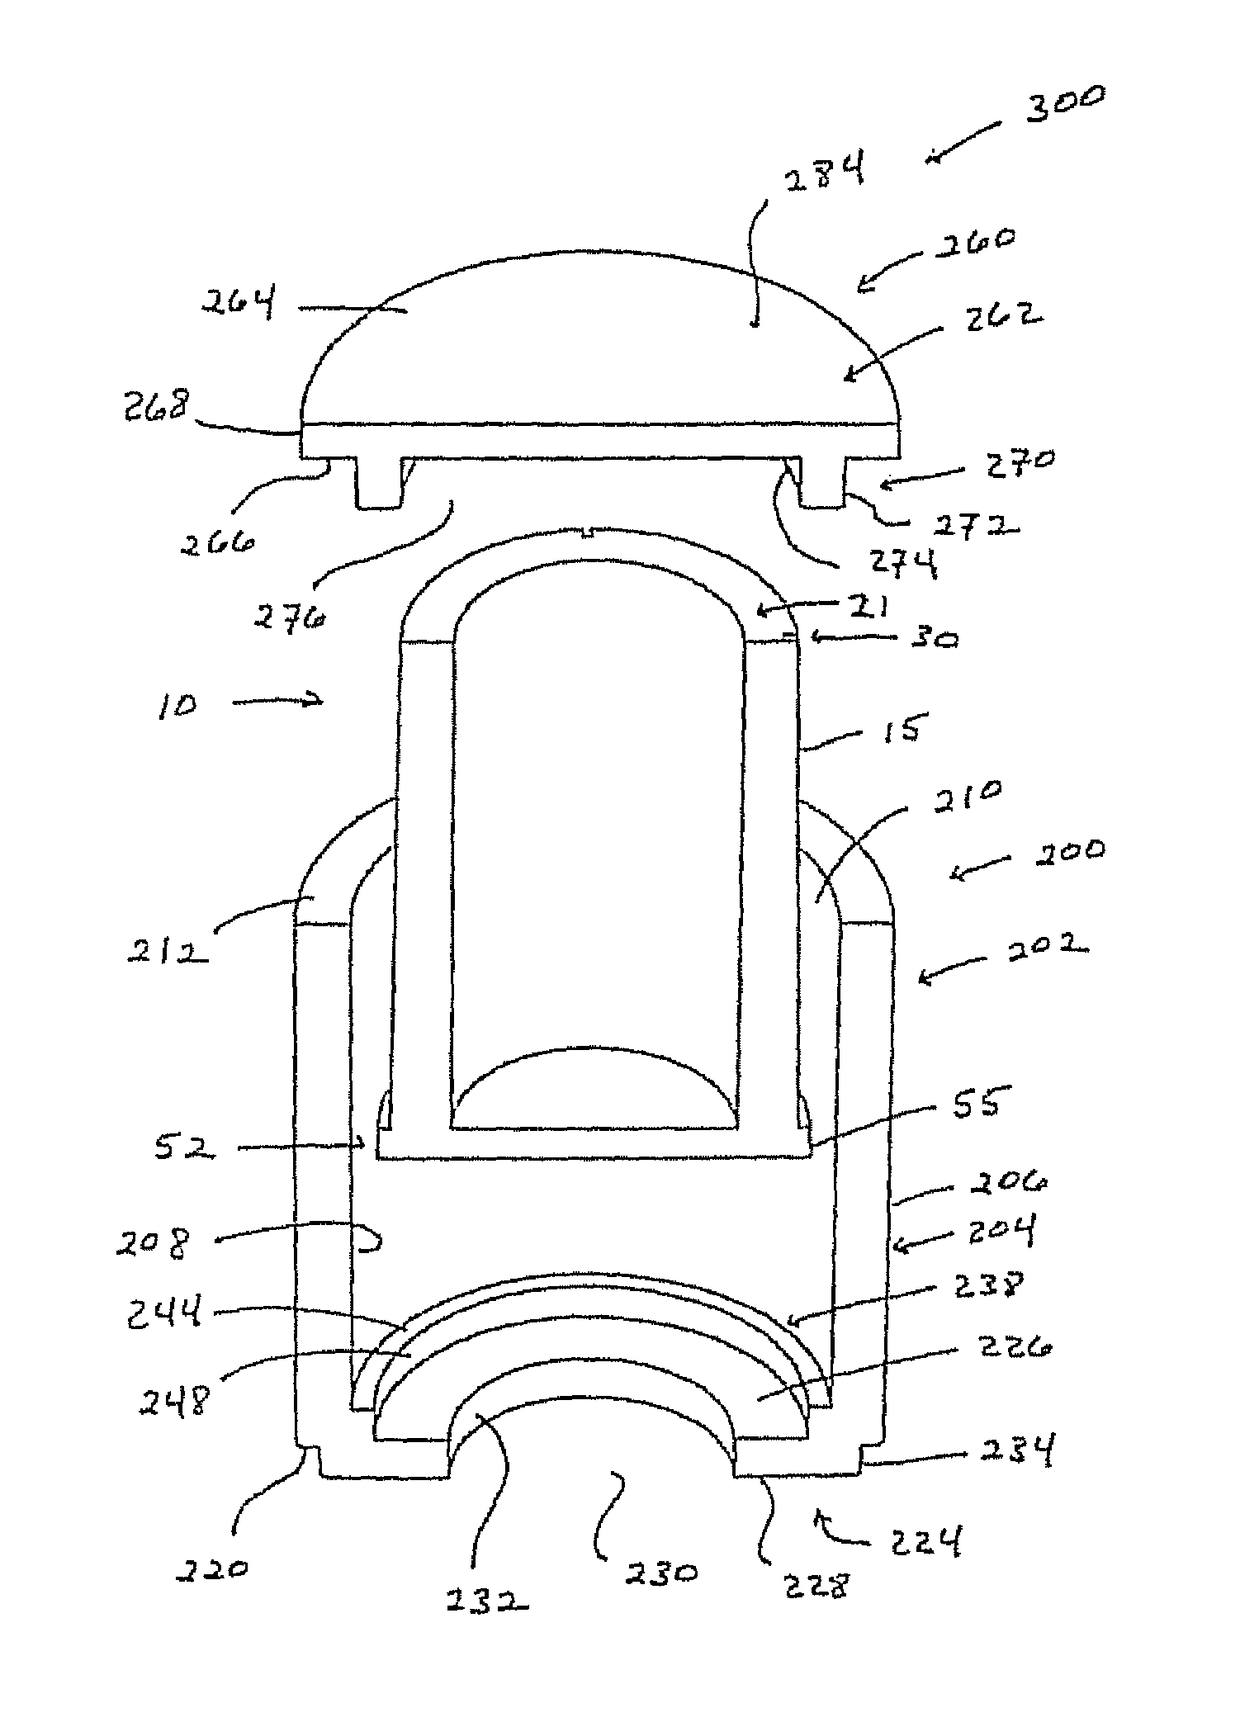 Concrete test cylinder mold, system, and method of use